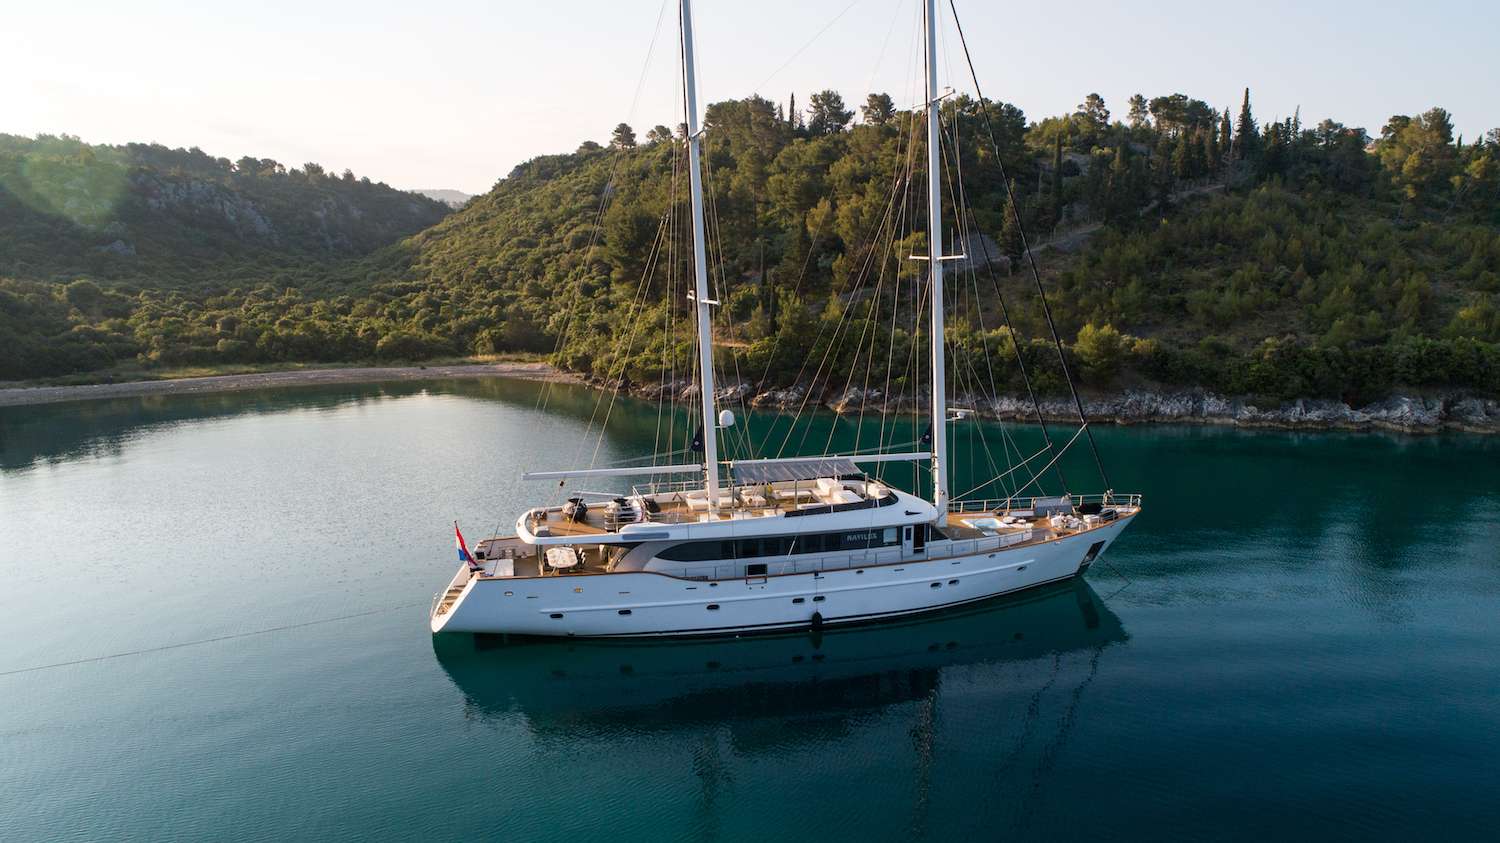 NAVILUX Yacht Charter - At anchor in Croatia